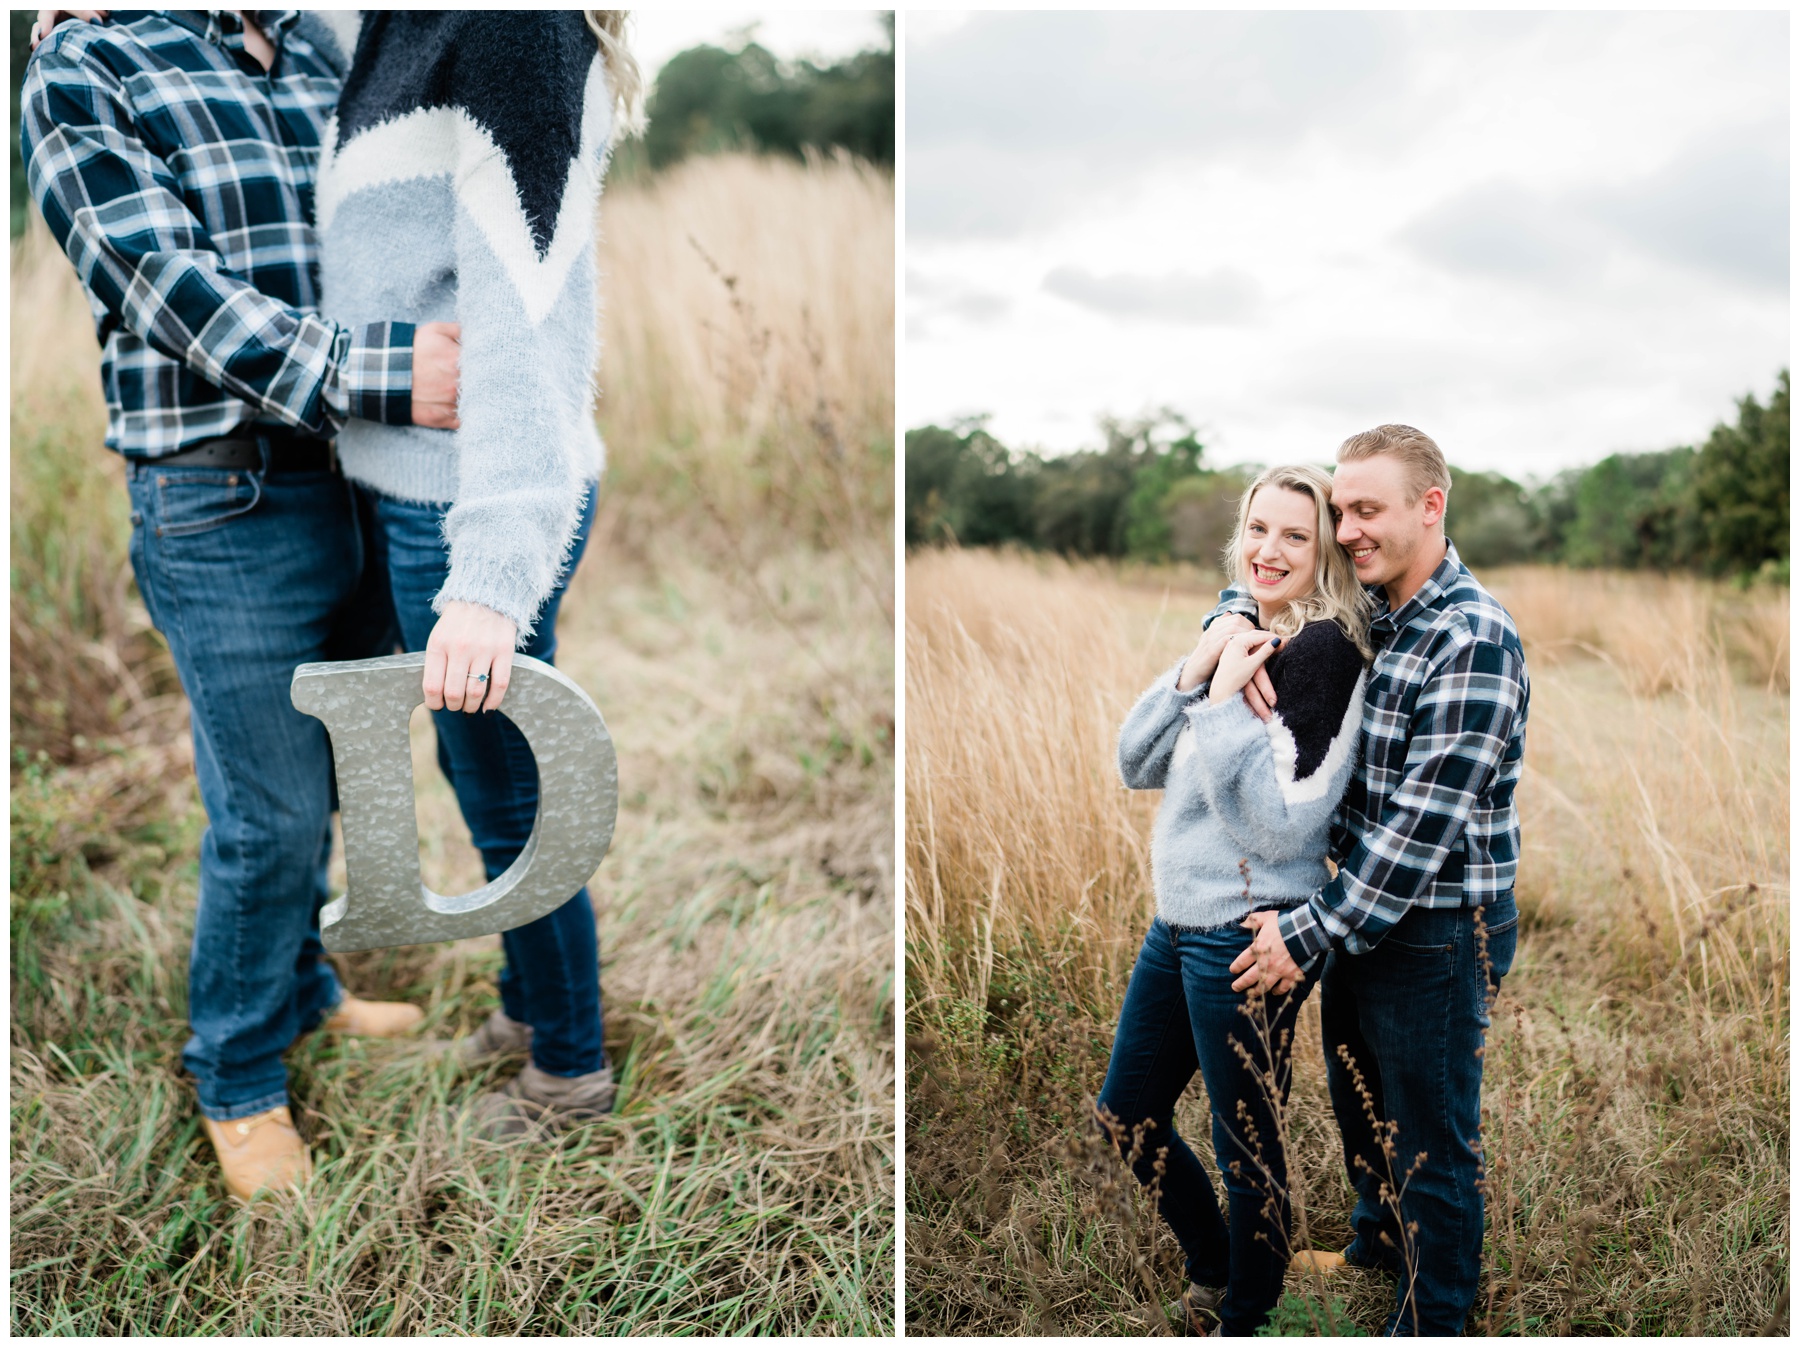 Engaged couple embraces in meadow setting during Southwest Florida photo shoot.